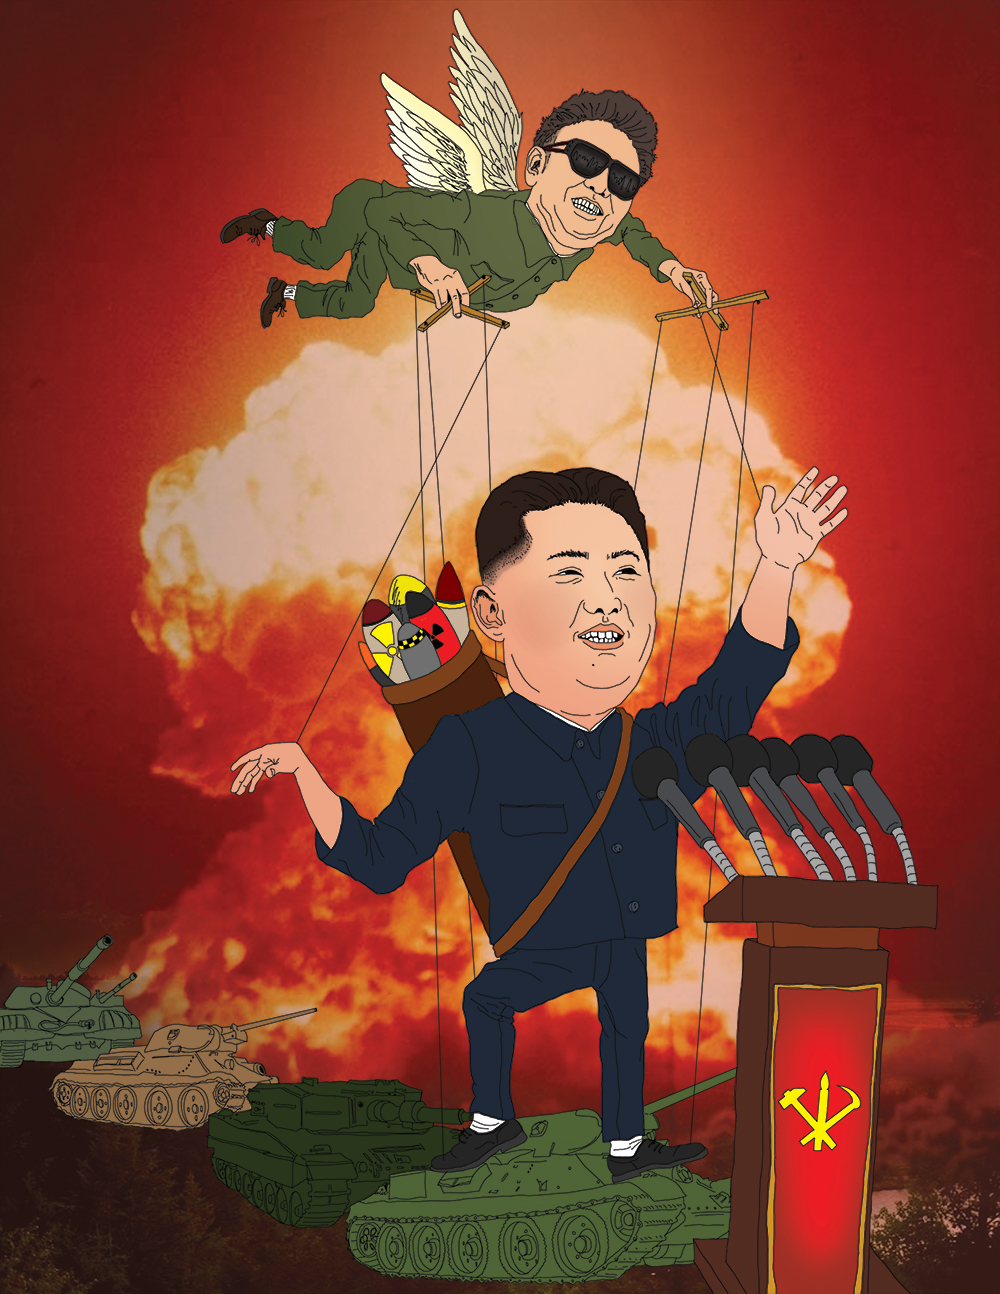 Image to accompany editorial about the policies of Kim Jong-Un and his father